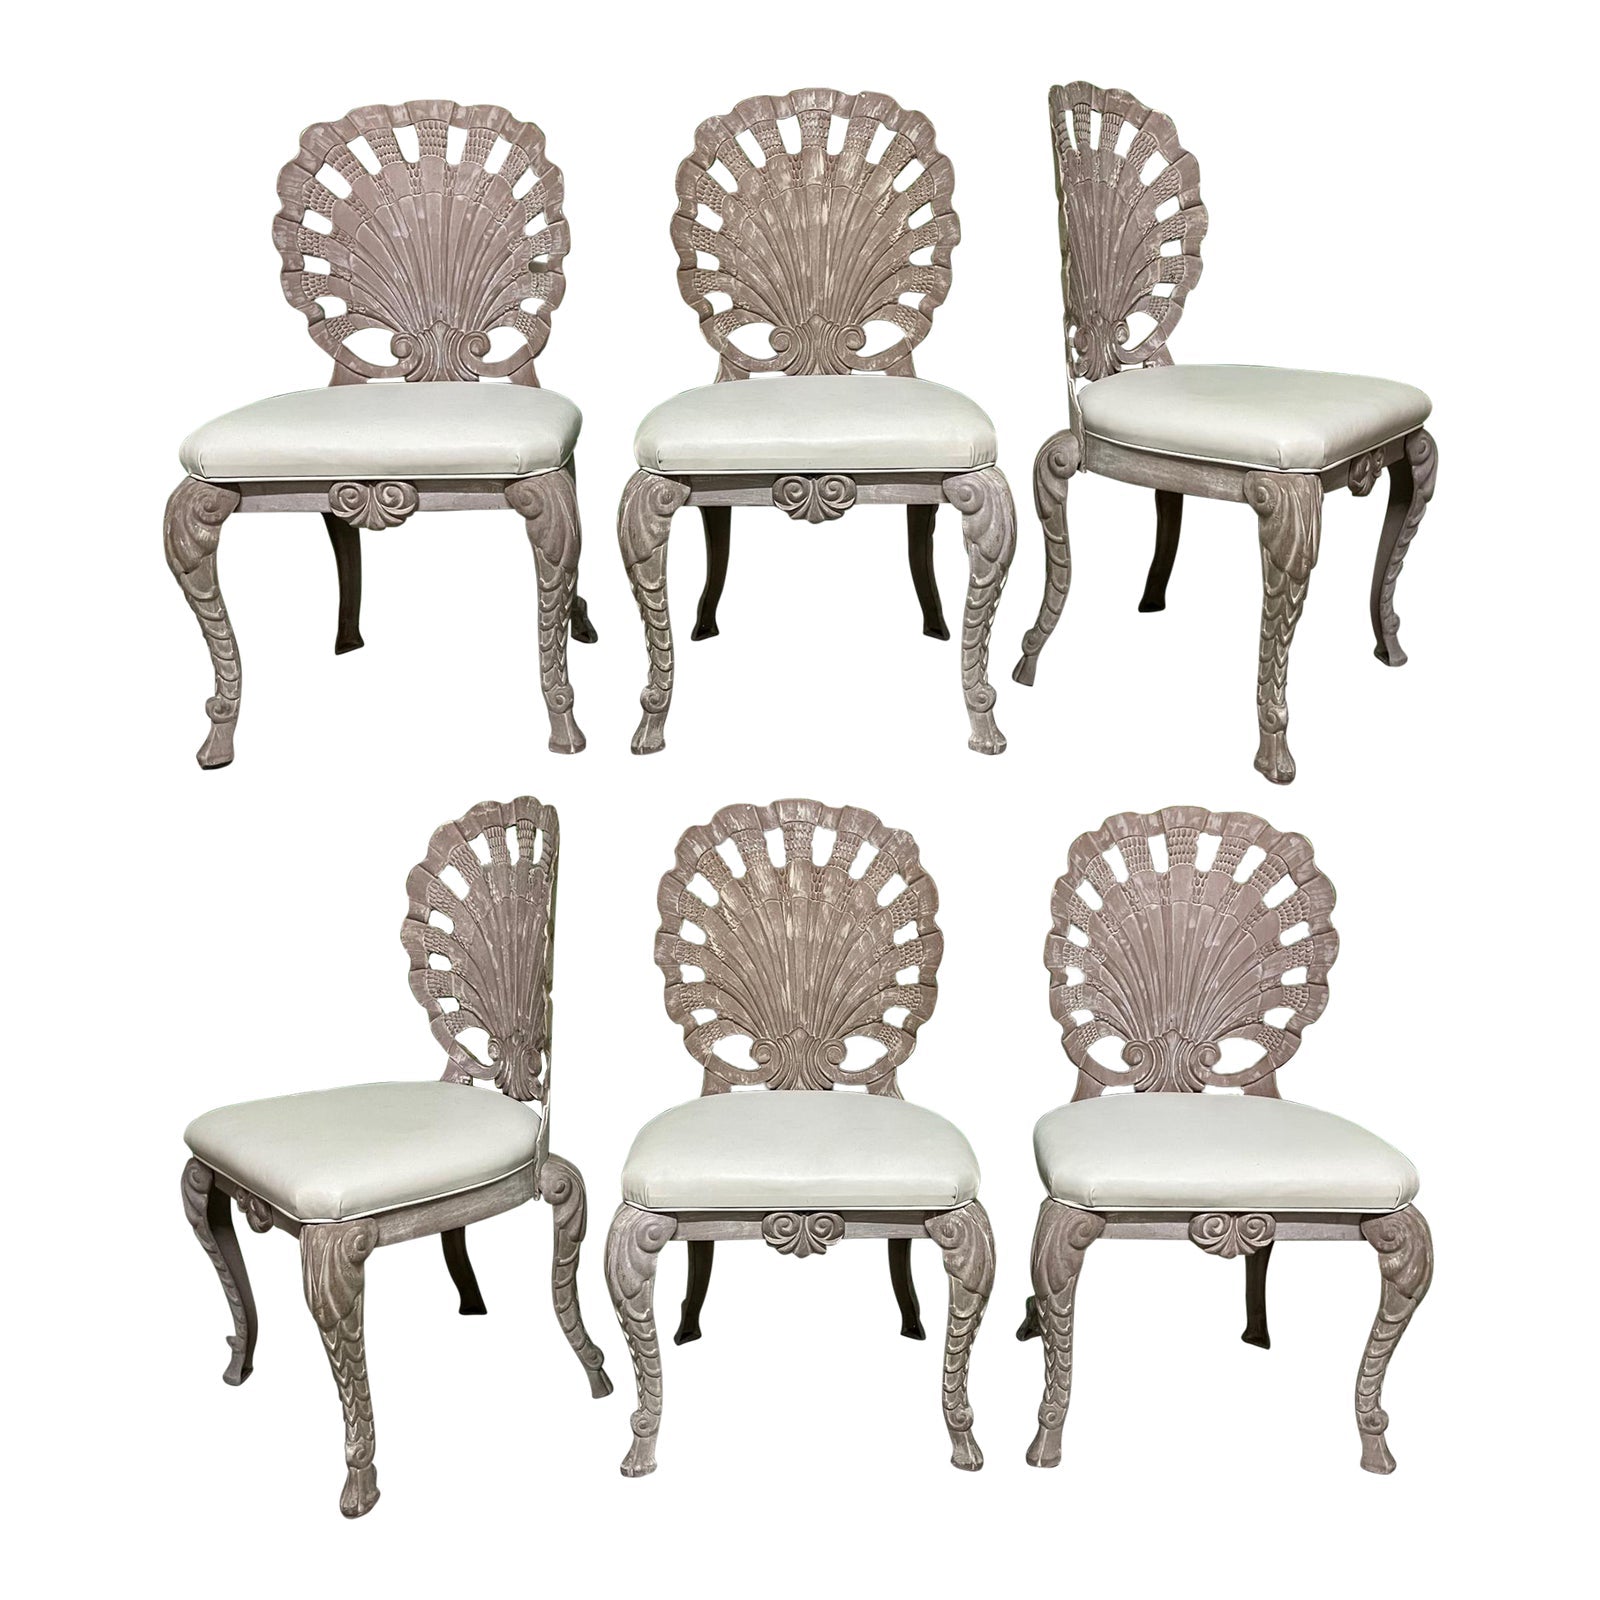 Venetian Grotto Style Shell Form Heavy Cast Dining Chairs, Set of 6